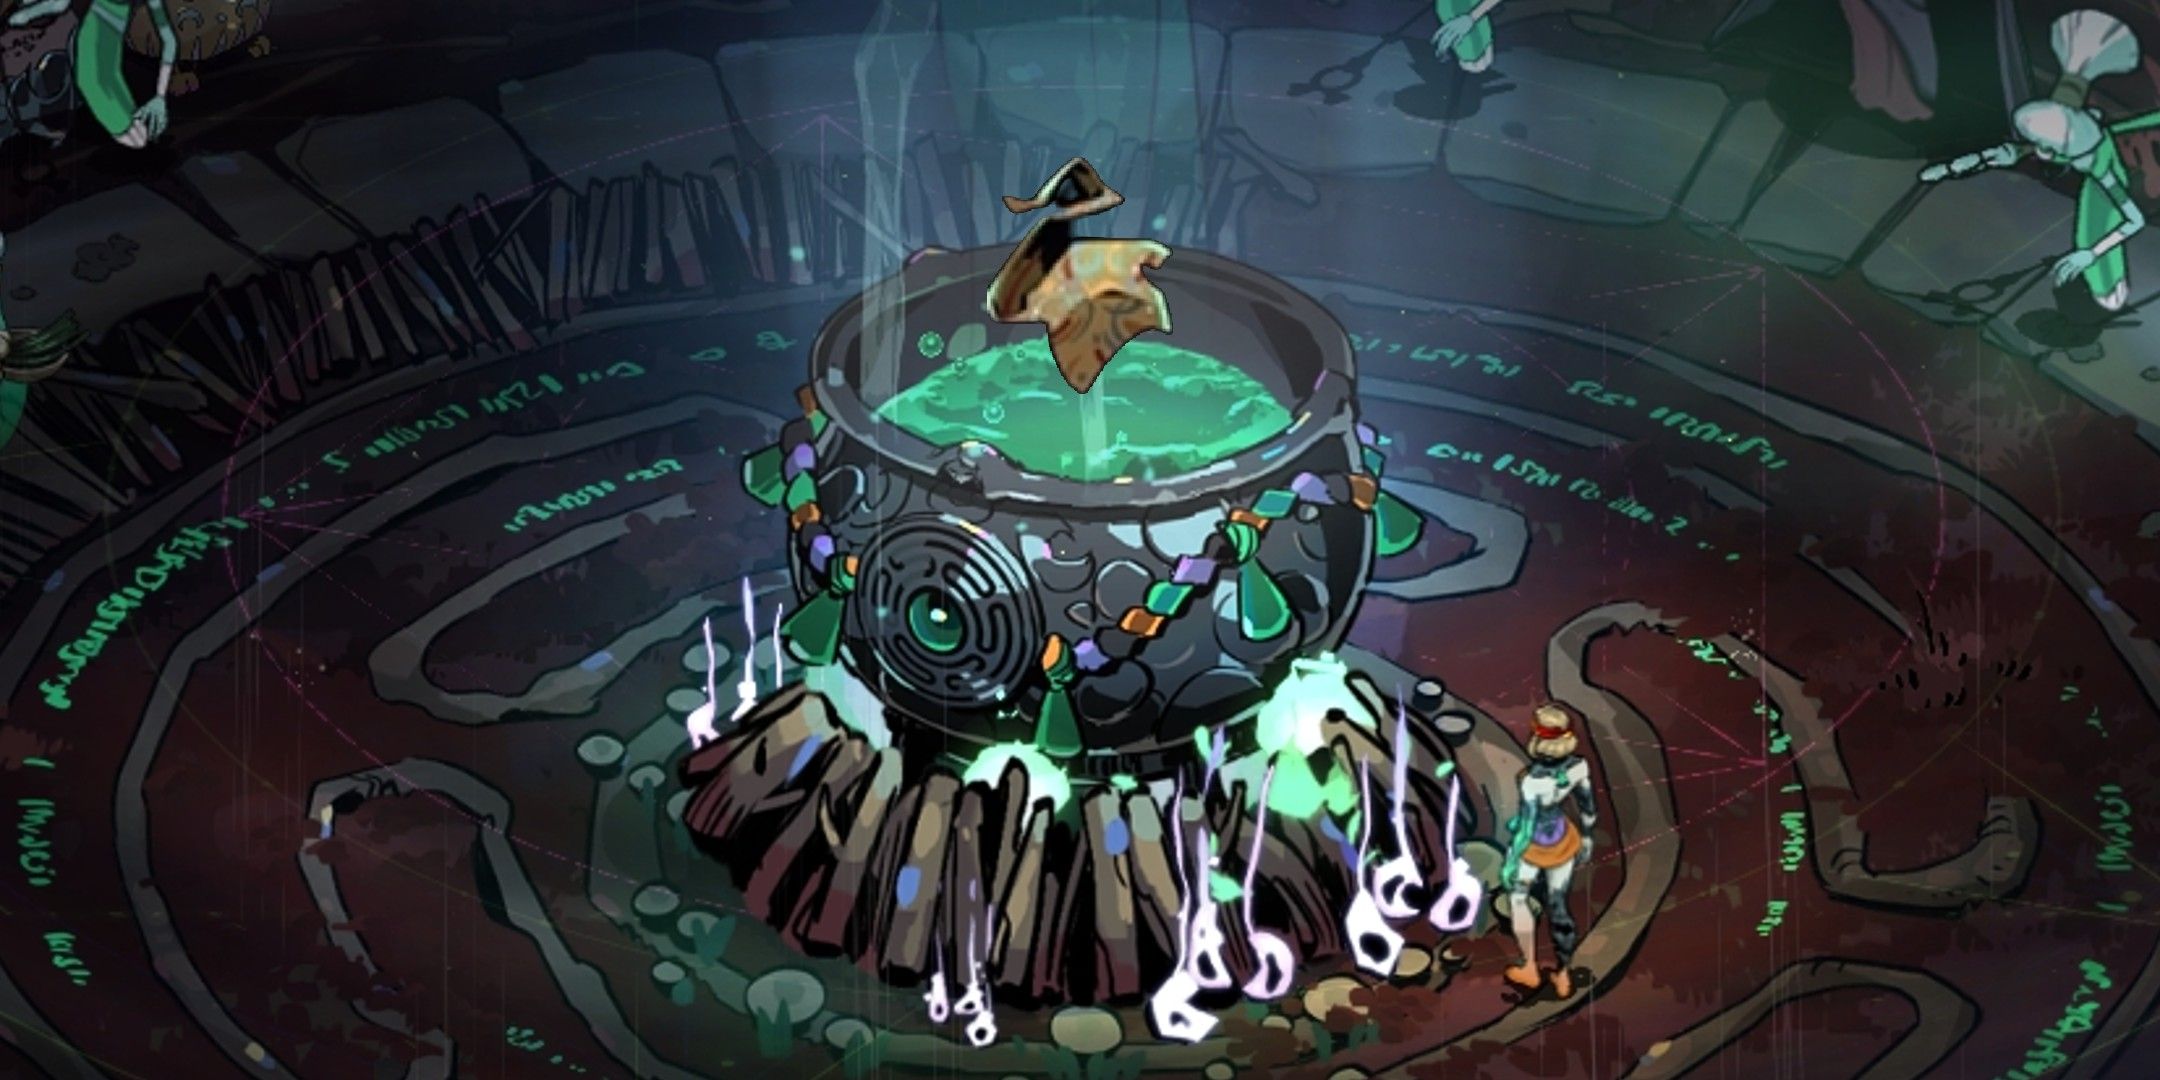 Fate Fabric edited floating on the cauldron in Hades 2